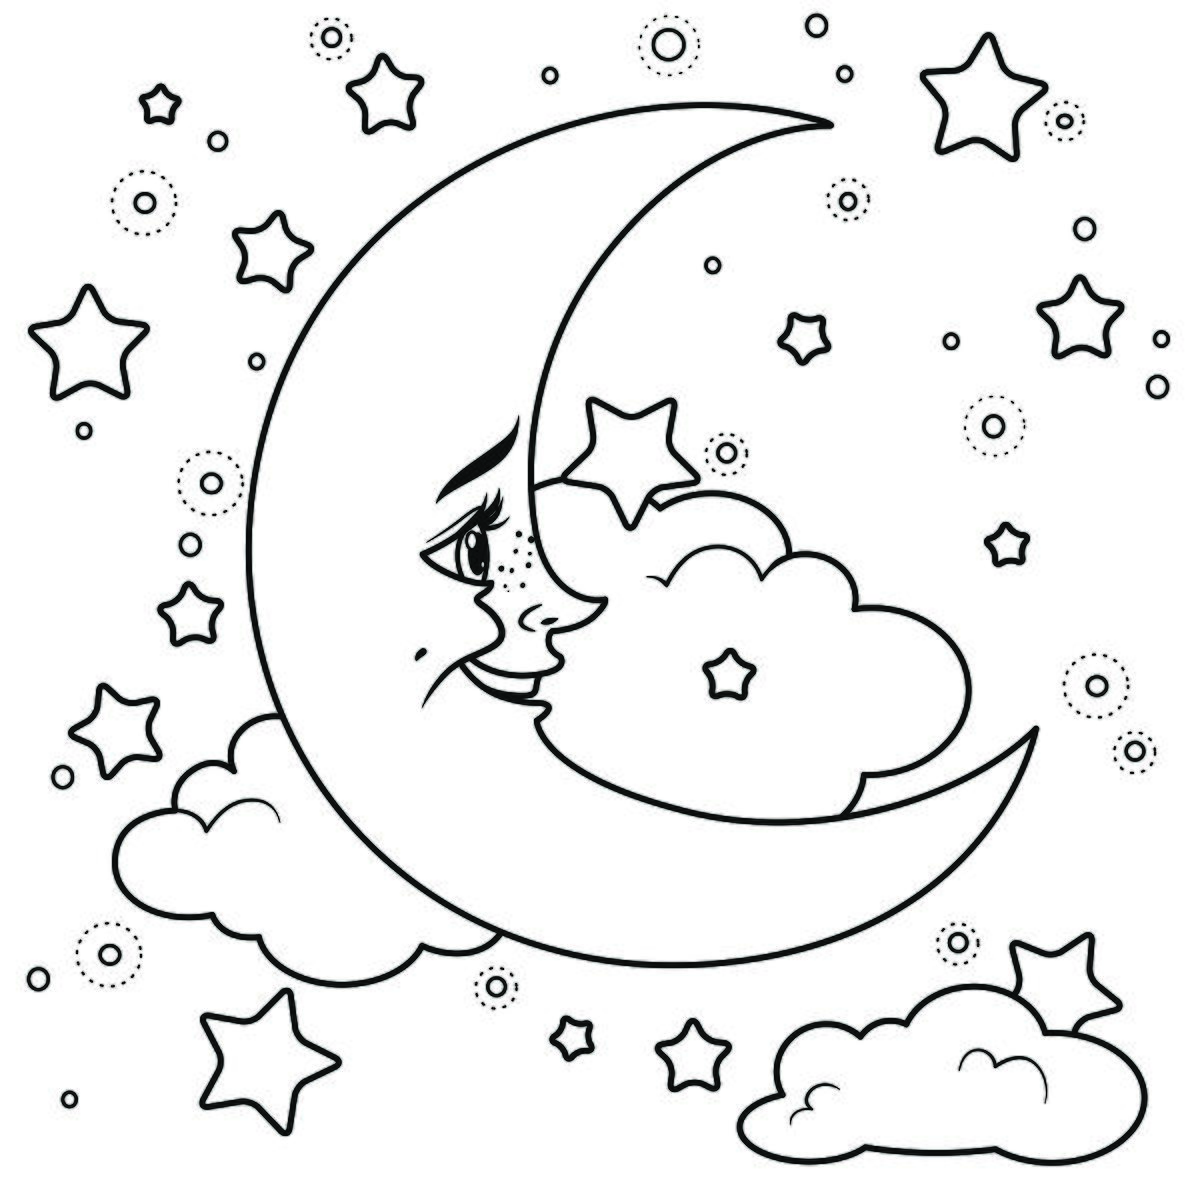 Outer space coloring pages for kids free printable coloring pages for kids that are out of this world printables mom